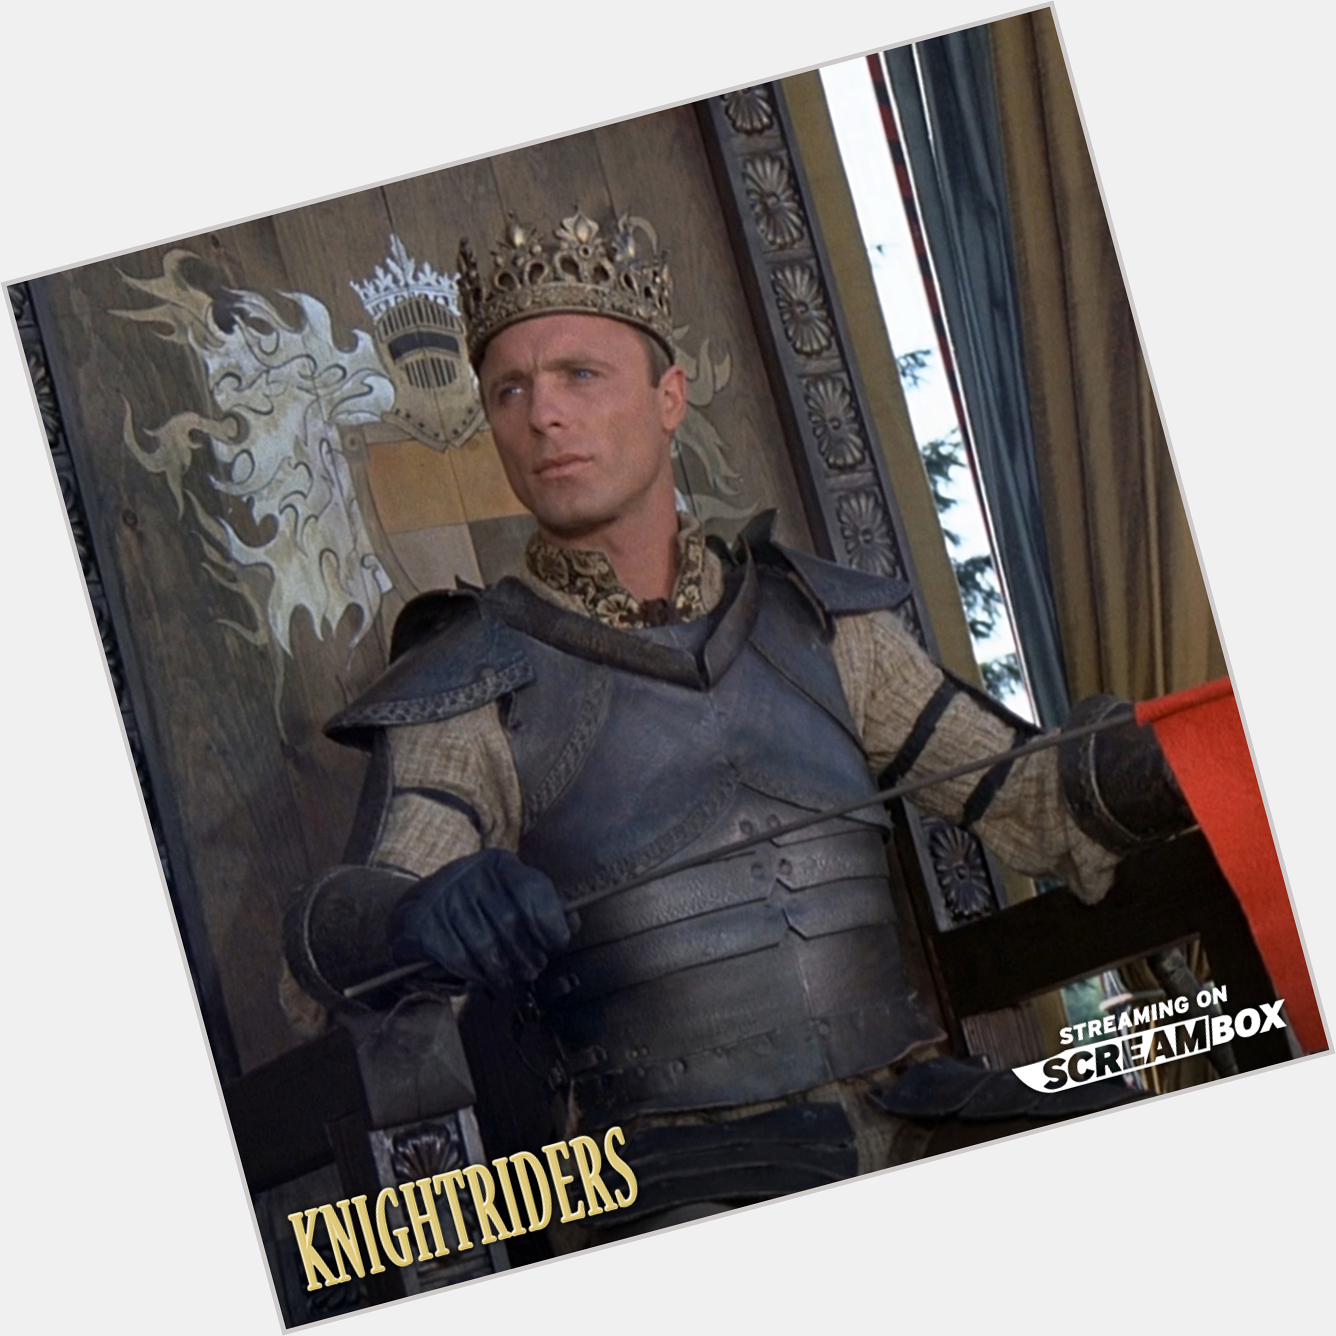 Happy 72nd birthday to Ed Harris!

Bow before the king in George A. Romero\s Knightriders on Screambox. 